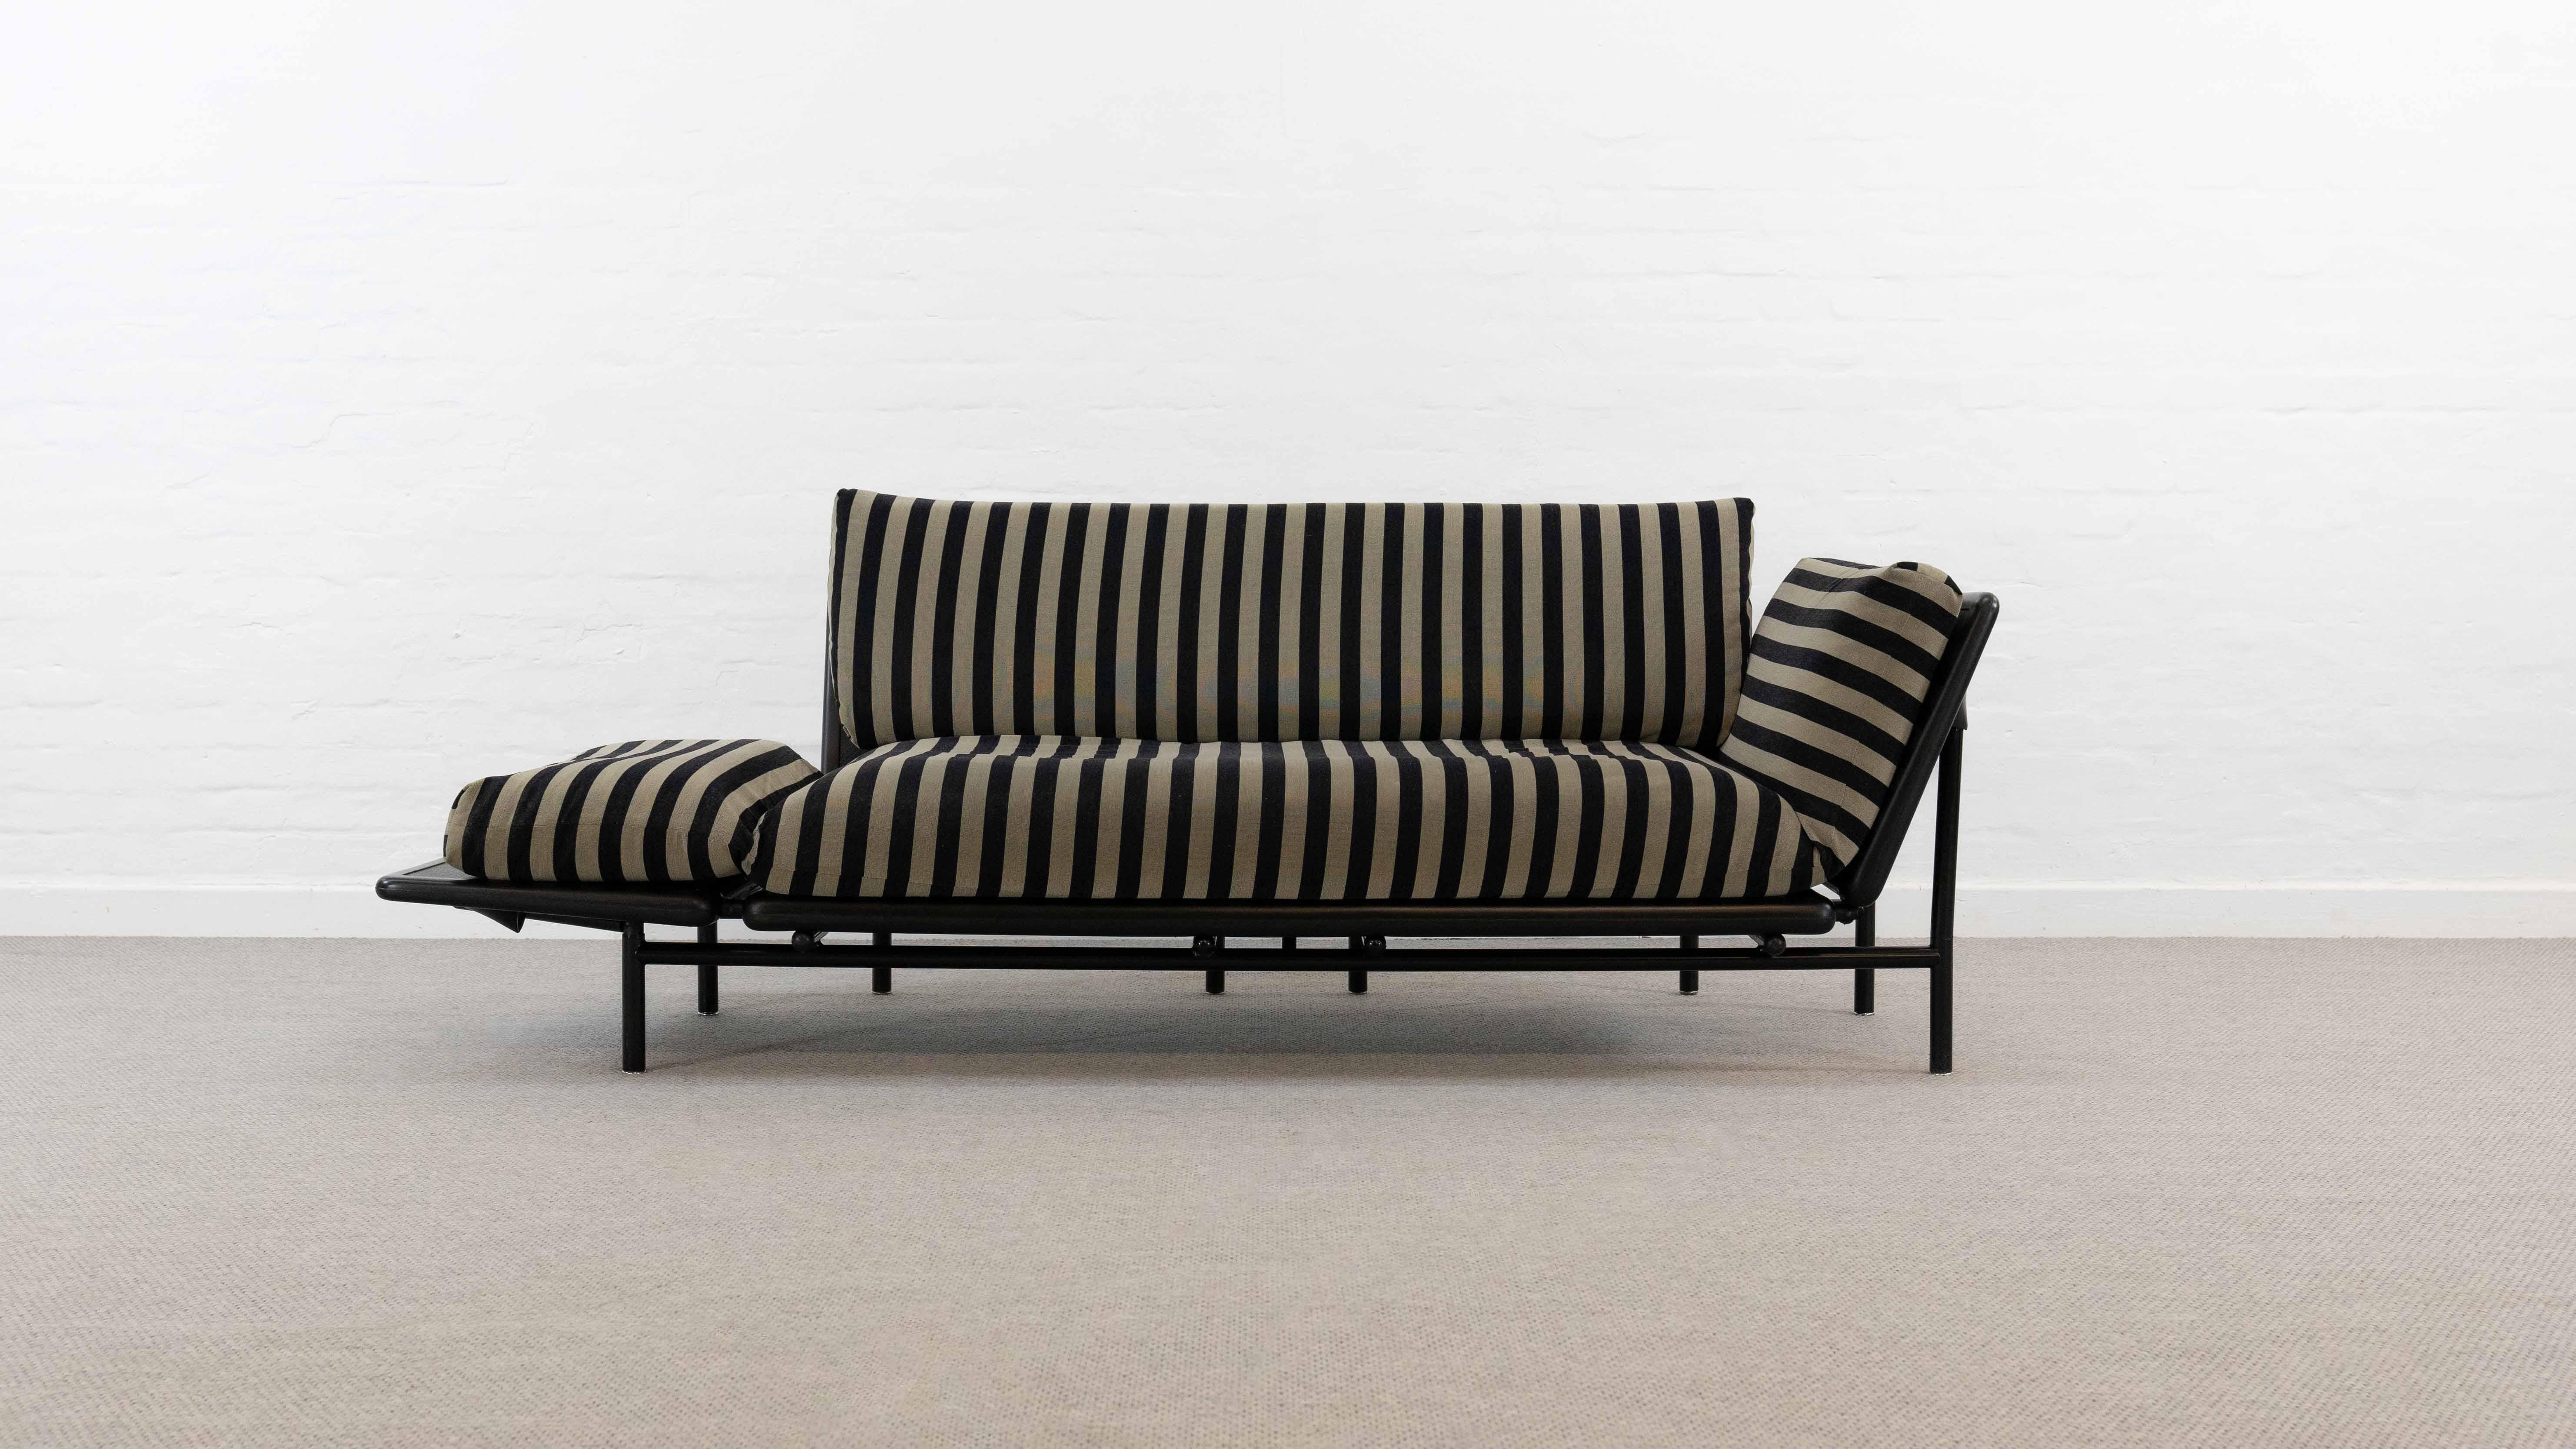 RATAPLAN SOFA - DAYBED BY ROBERTO TAPINASSI FOR DEMA, ITALY 80er Jahre (Postmoderne) im Angebot